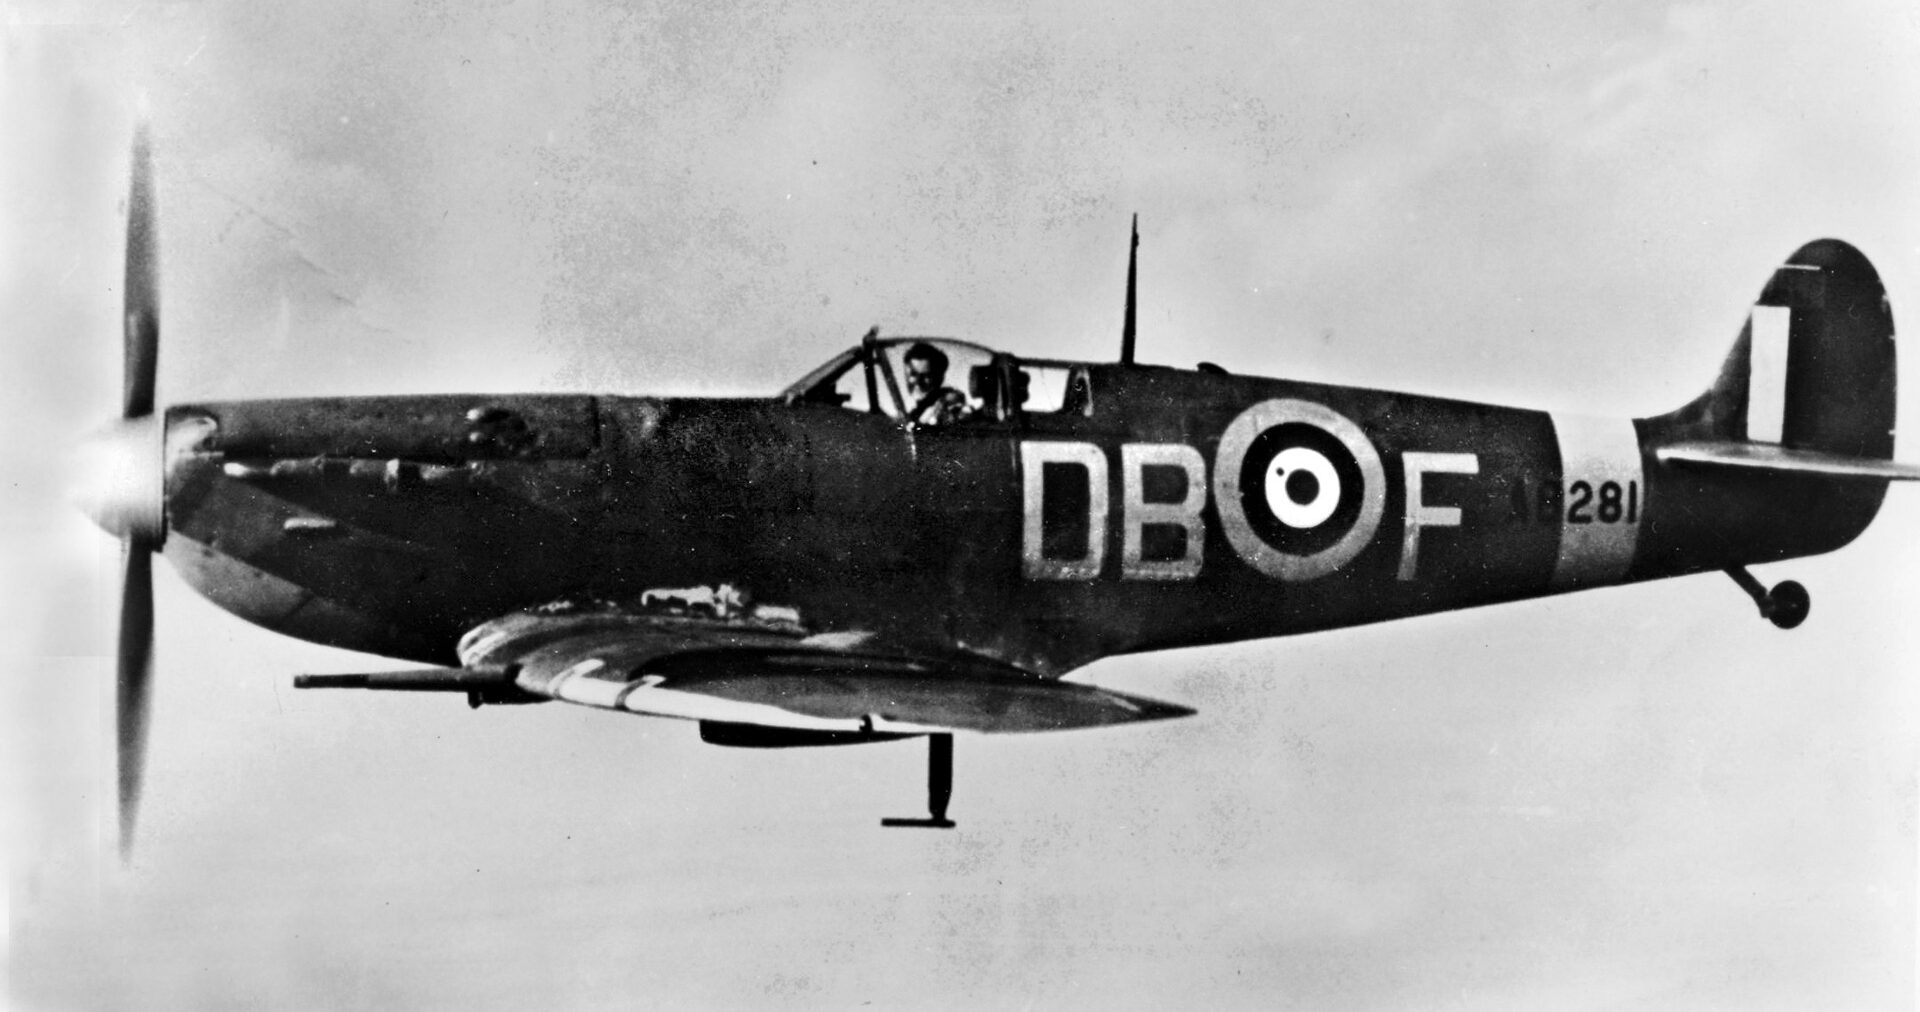 RCAF pilot Ash was photographed in his Supermarine Spitfire fighter.